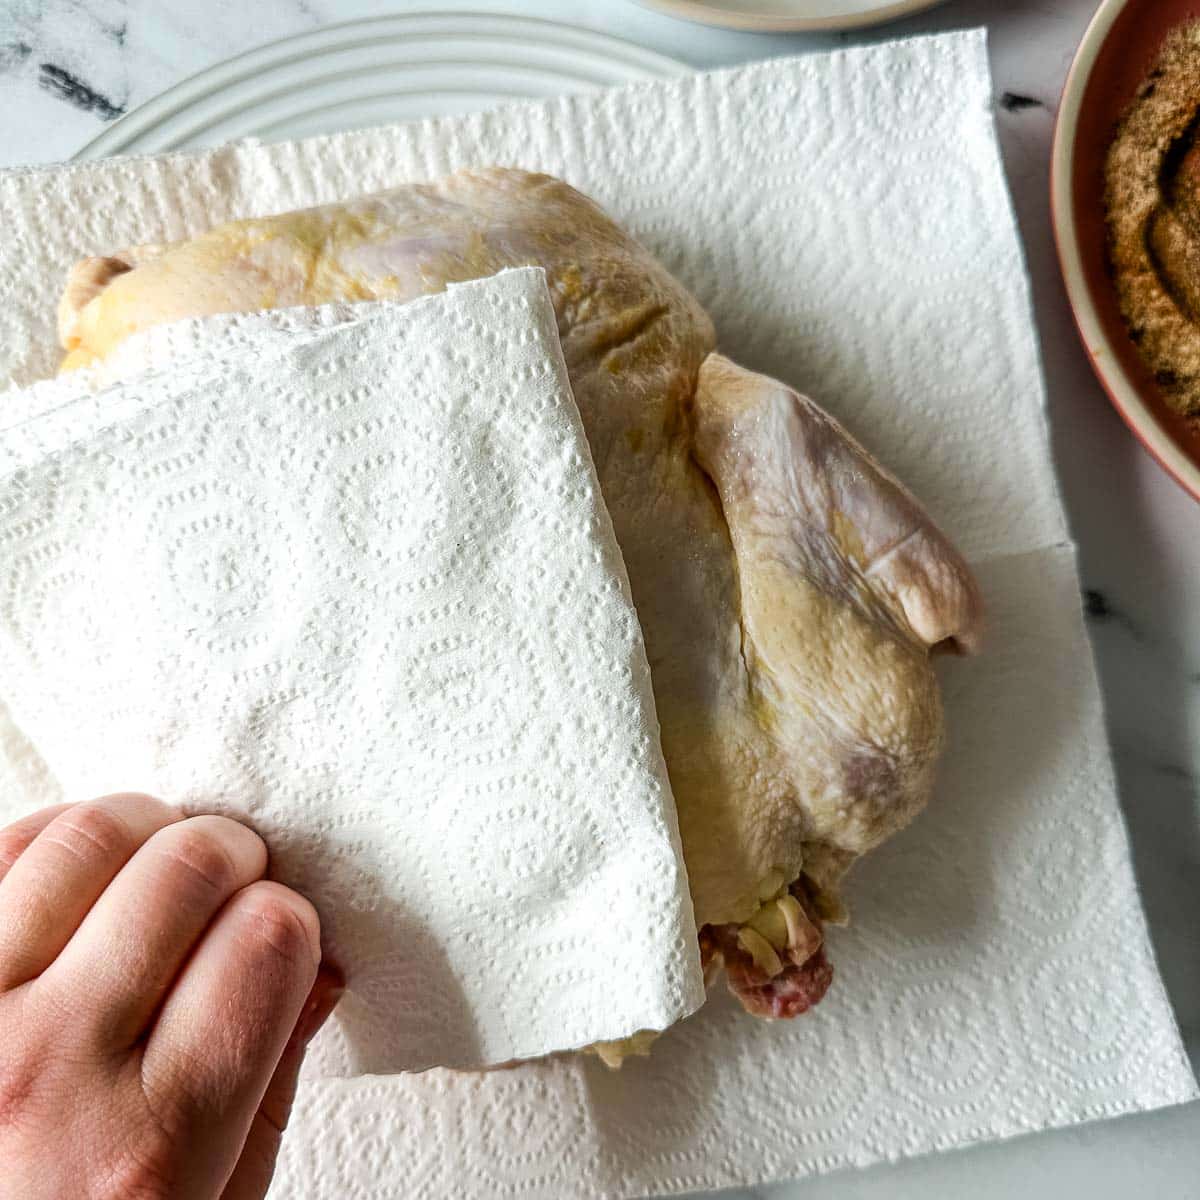 Raw chicken is pat dry with a paper towel.